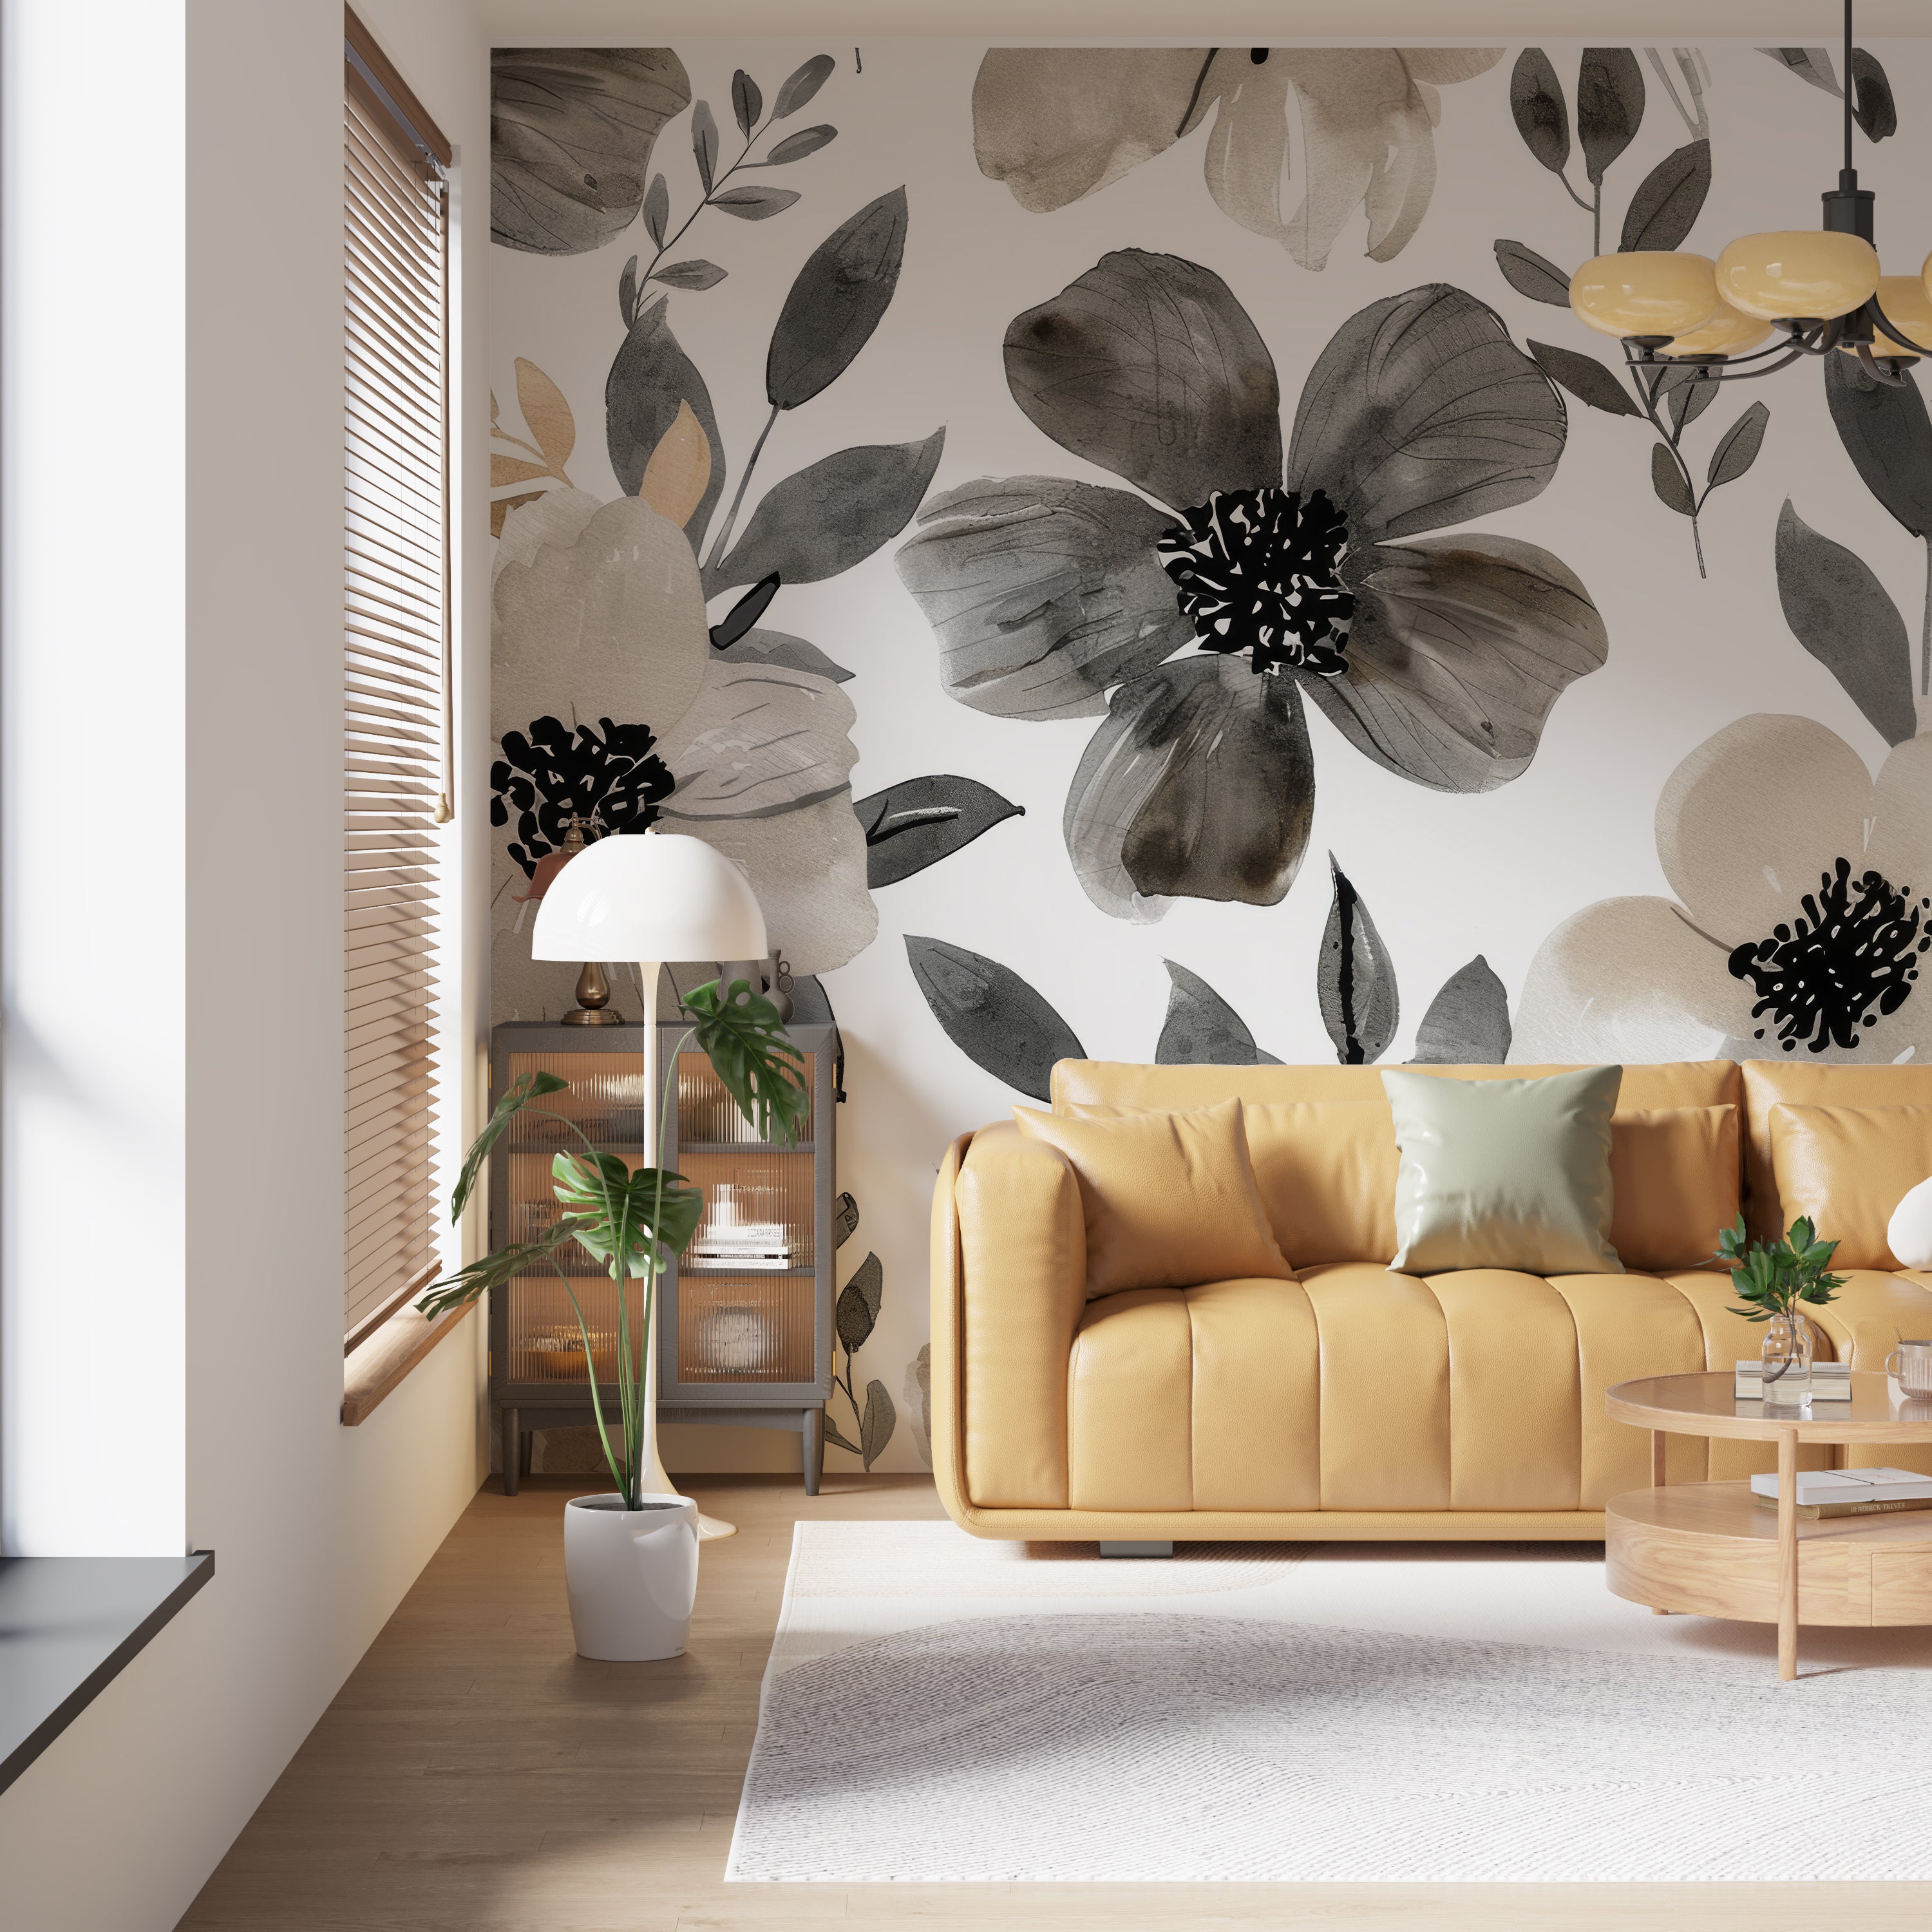 Floral Infusion: Shades of Gray and Beige on the Walls